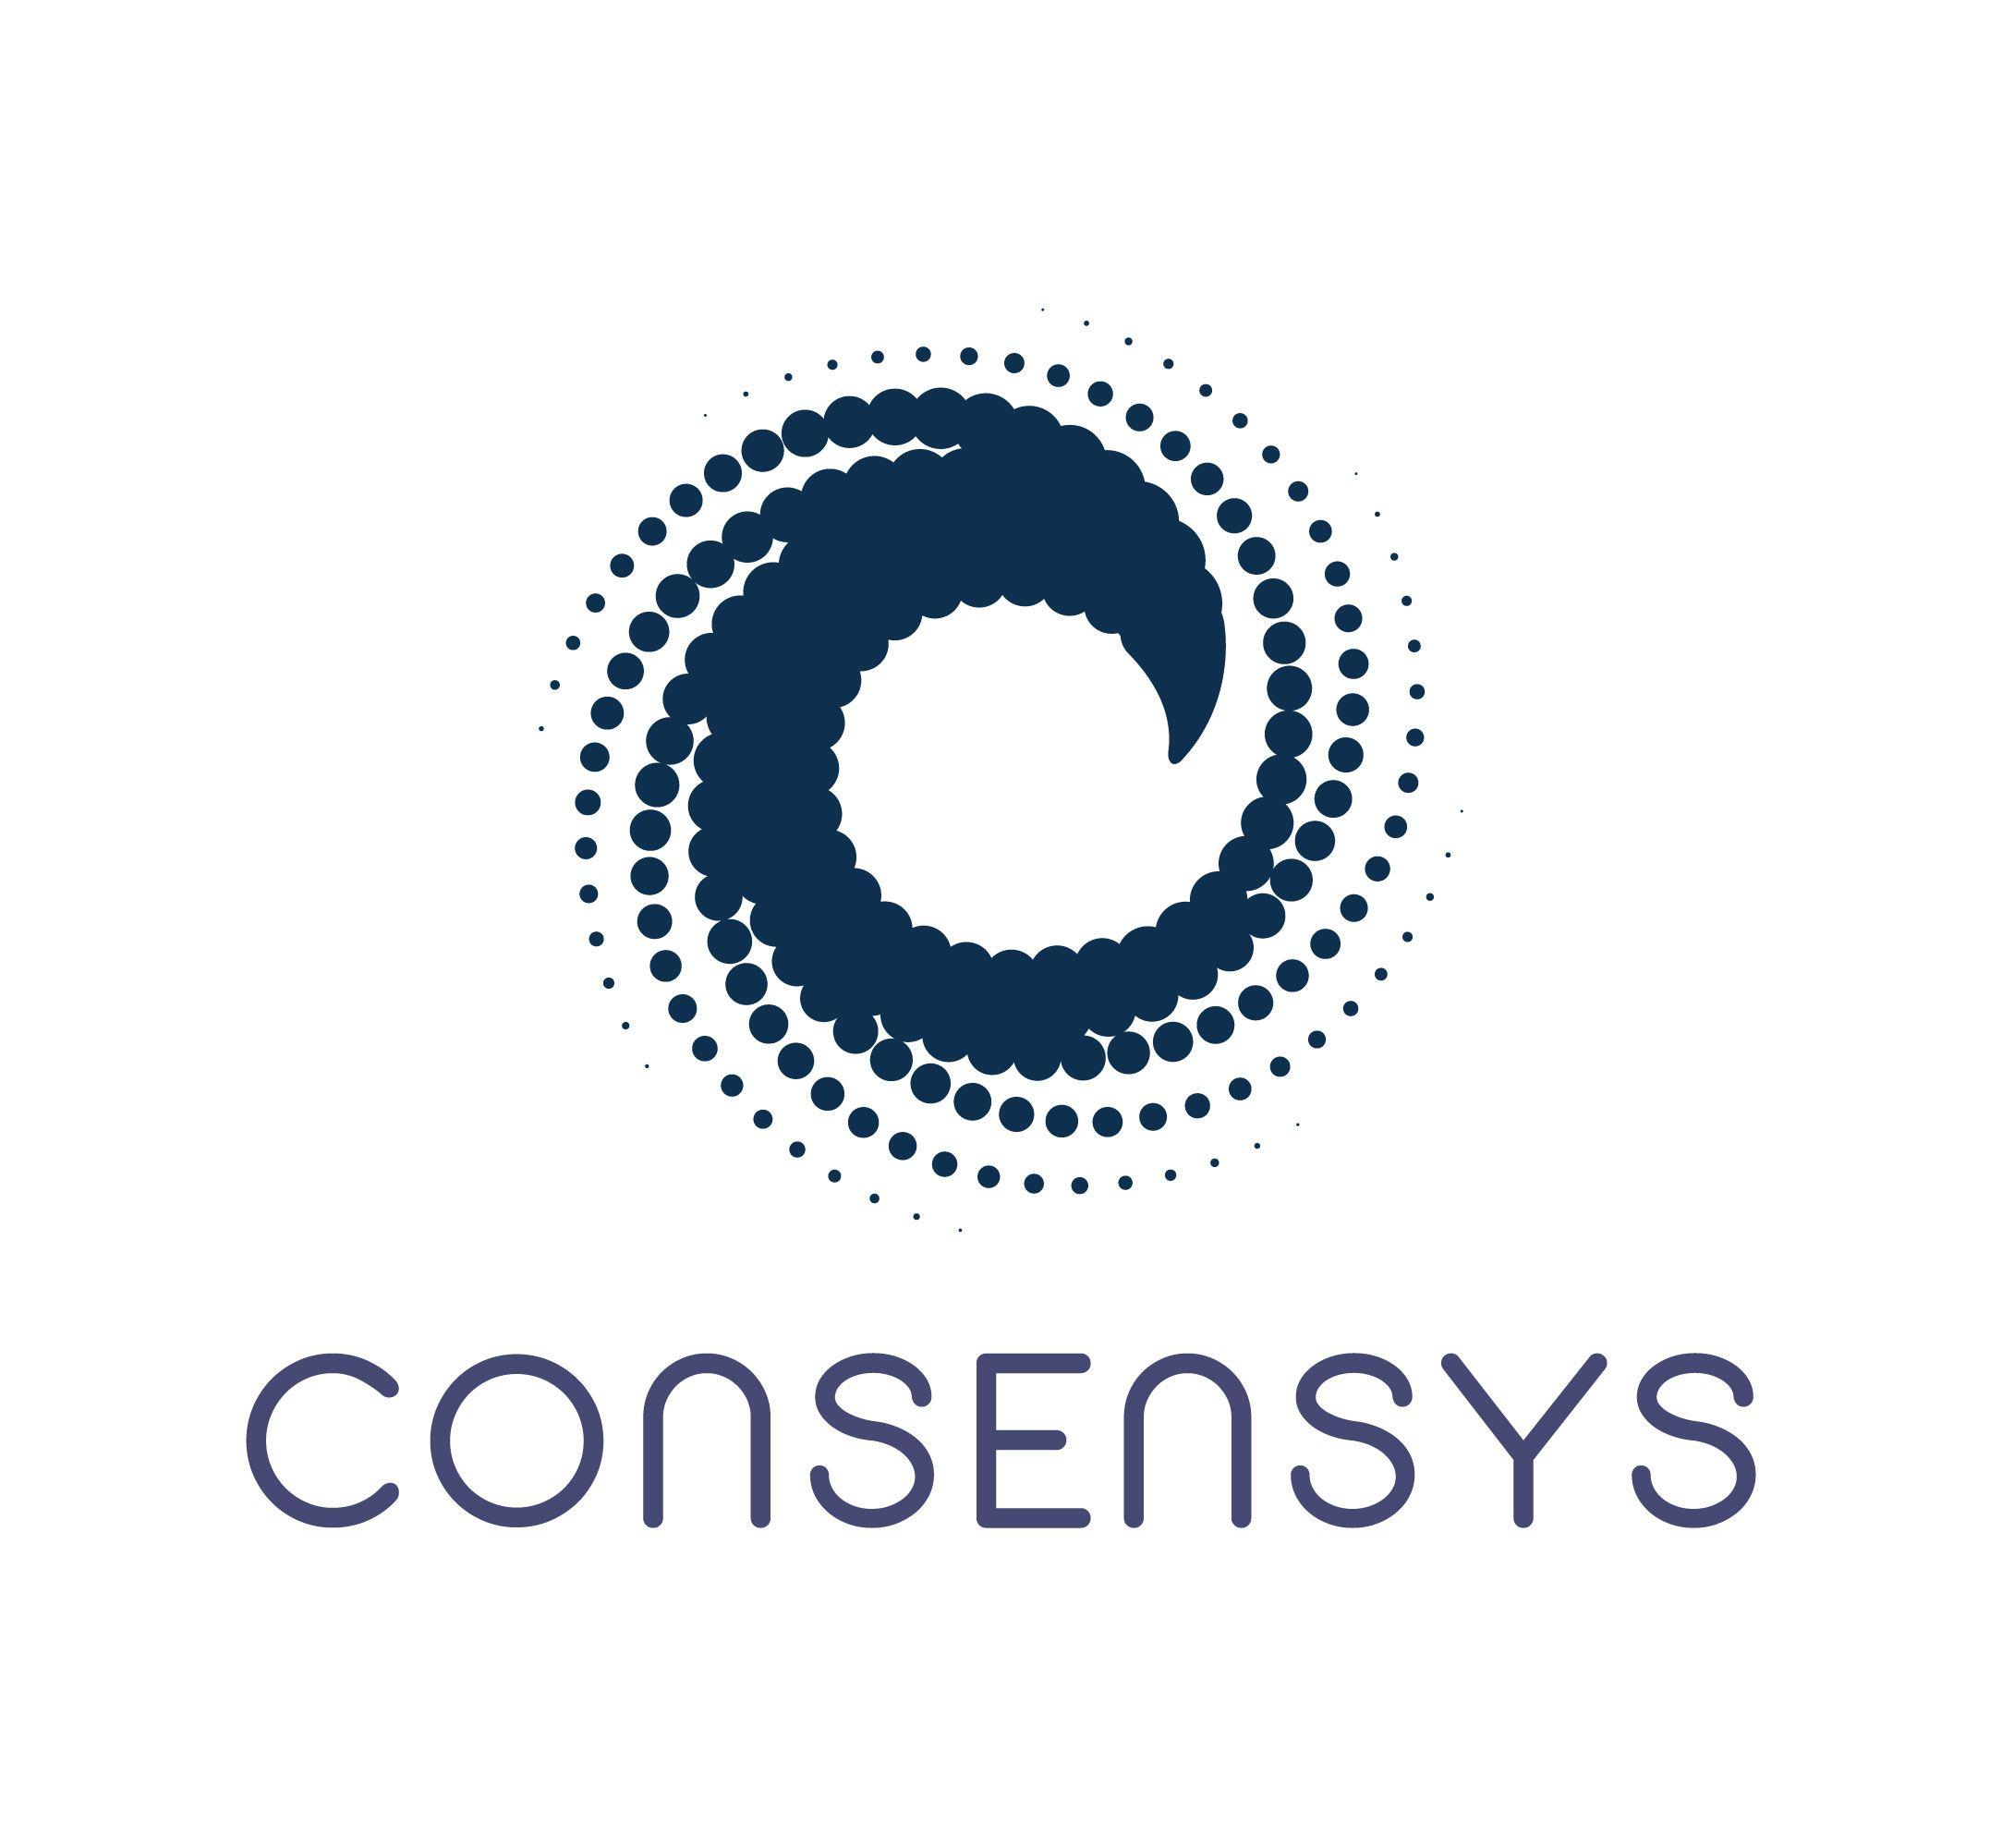 Blockchain Cloud Logo - Blockchain Cloud Computing Infrastructure Planned By ConsenSys